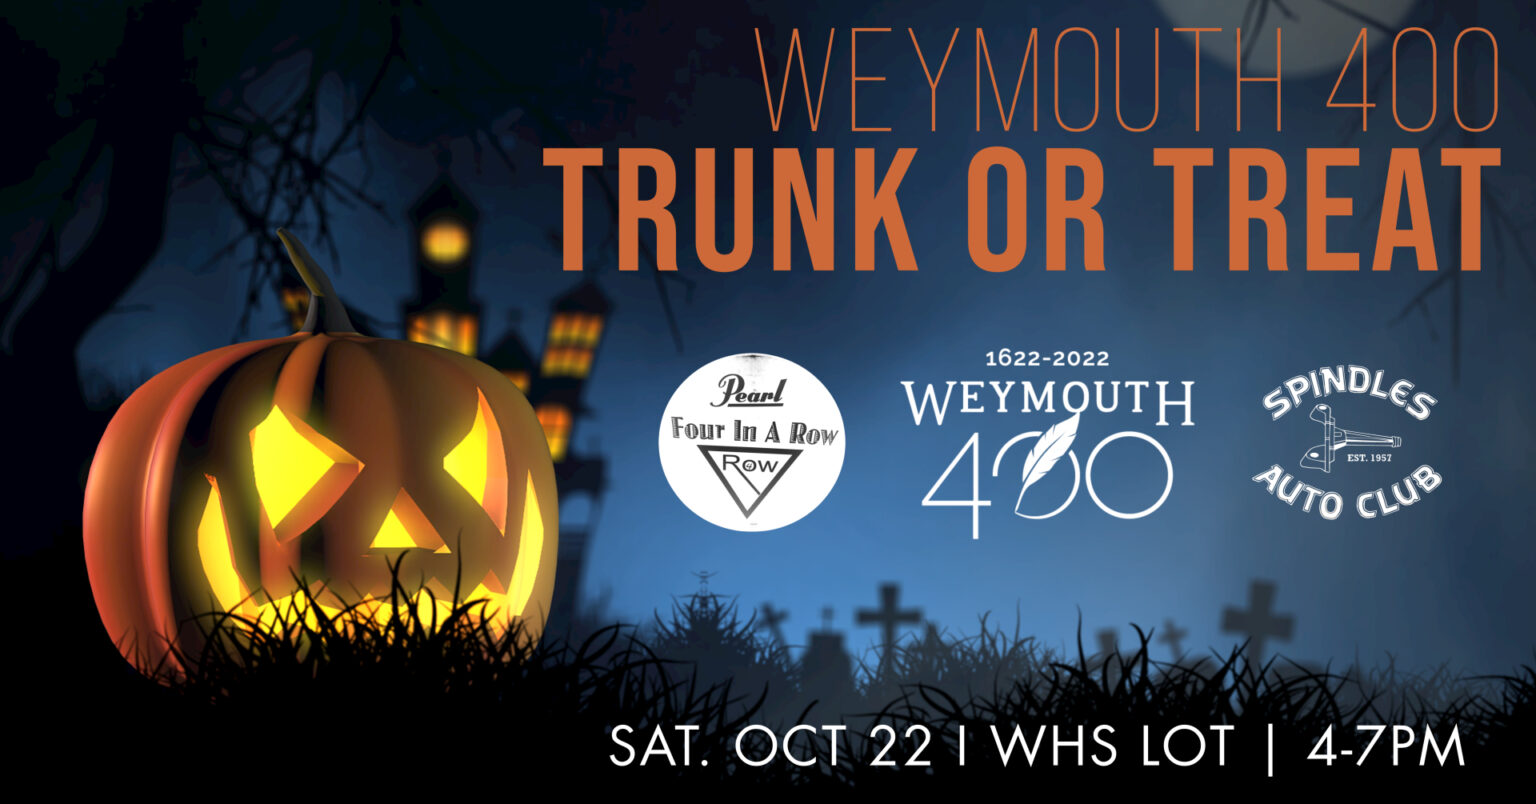 Weymouth 400 Trunk or Treat & Food Truck Fest 2022 365 things to do in South Shore MA